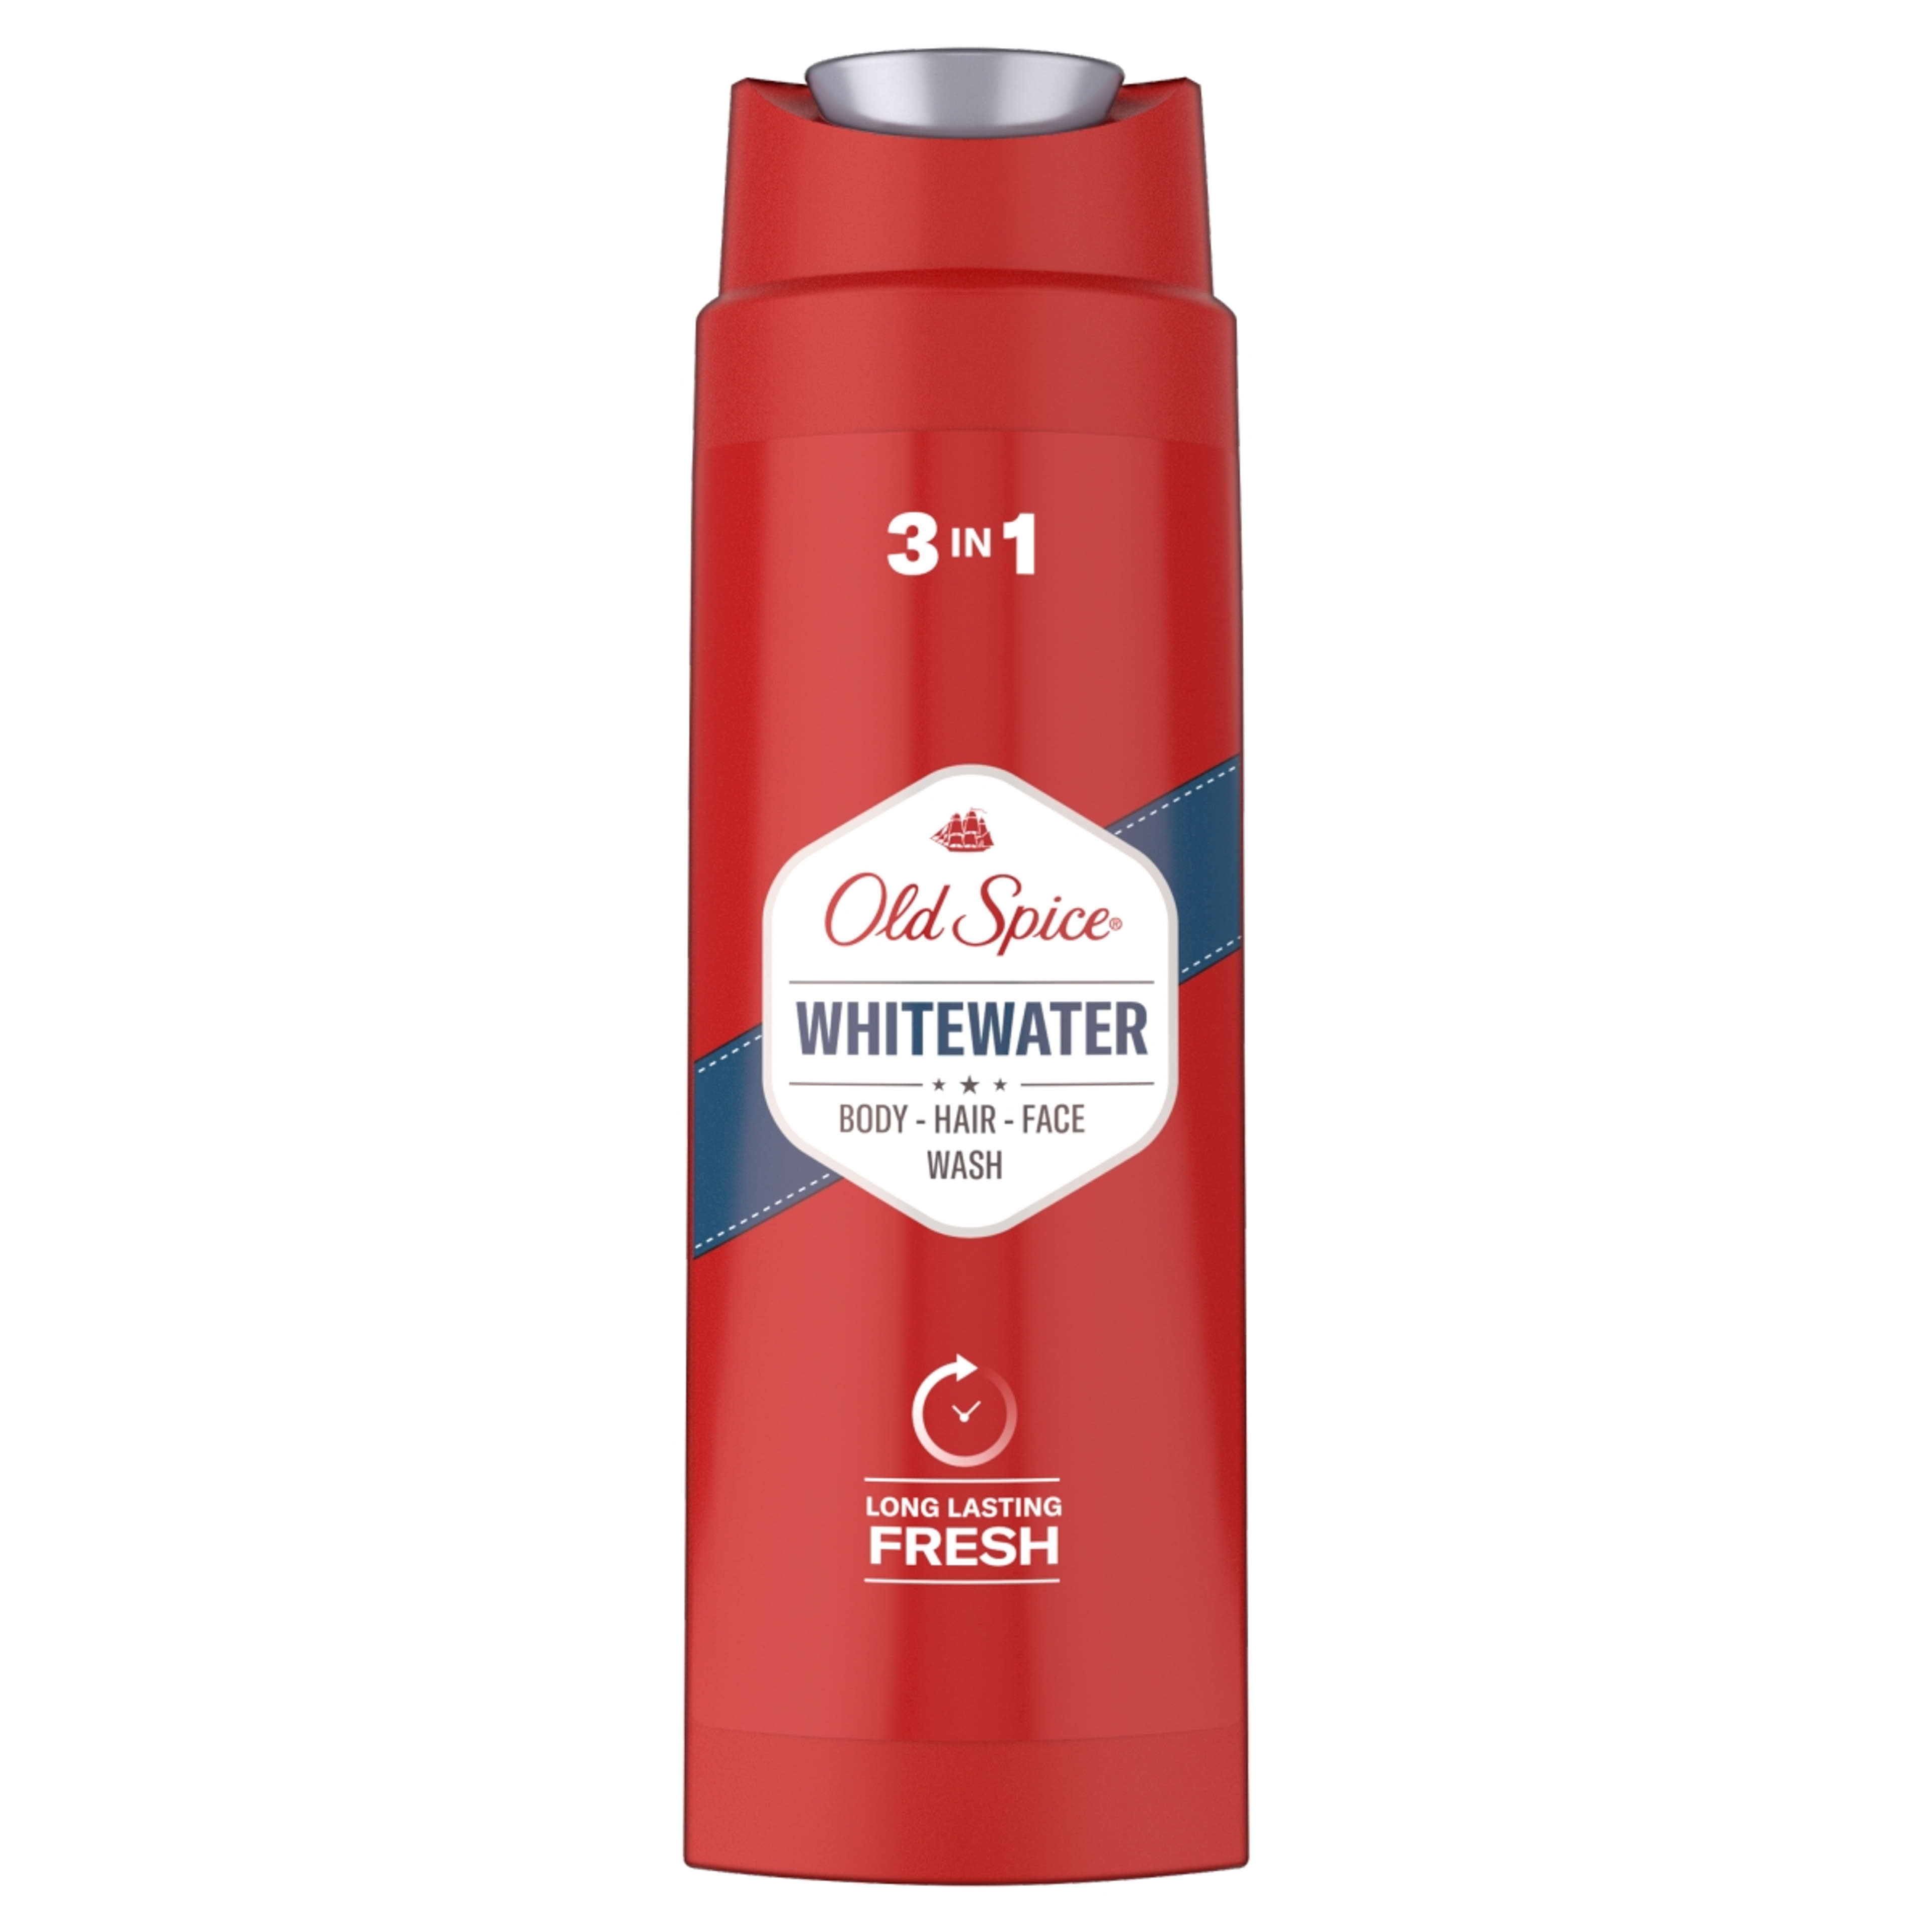 Old Spice Whitewater tusfürdo - 250 ml